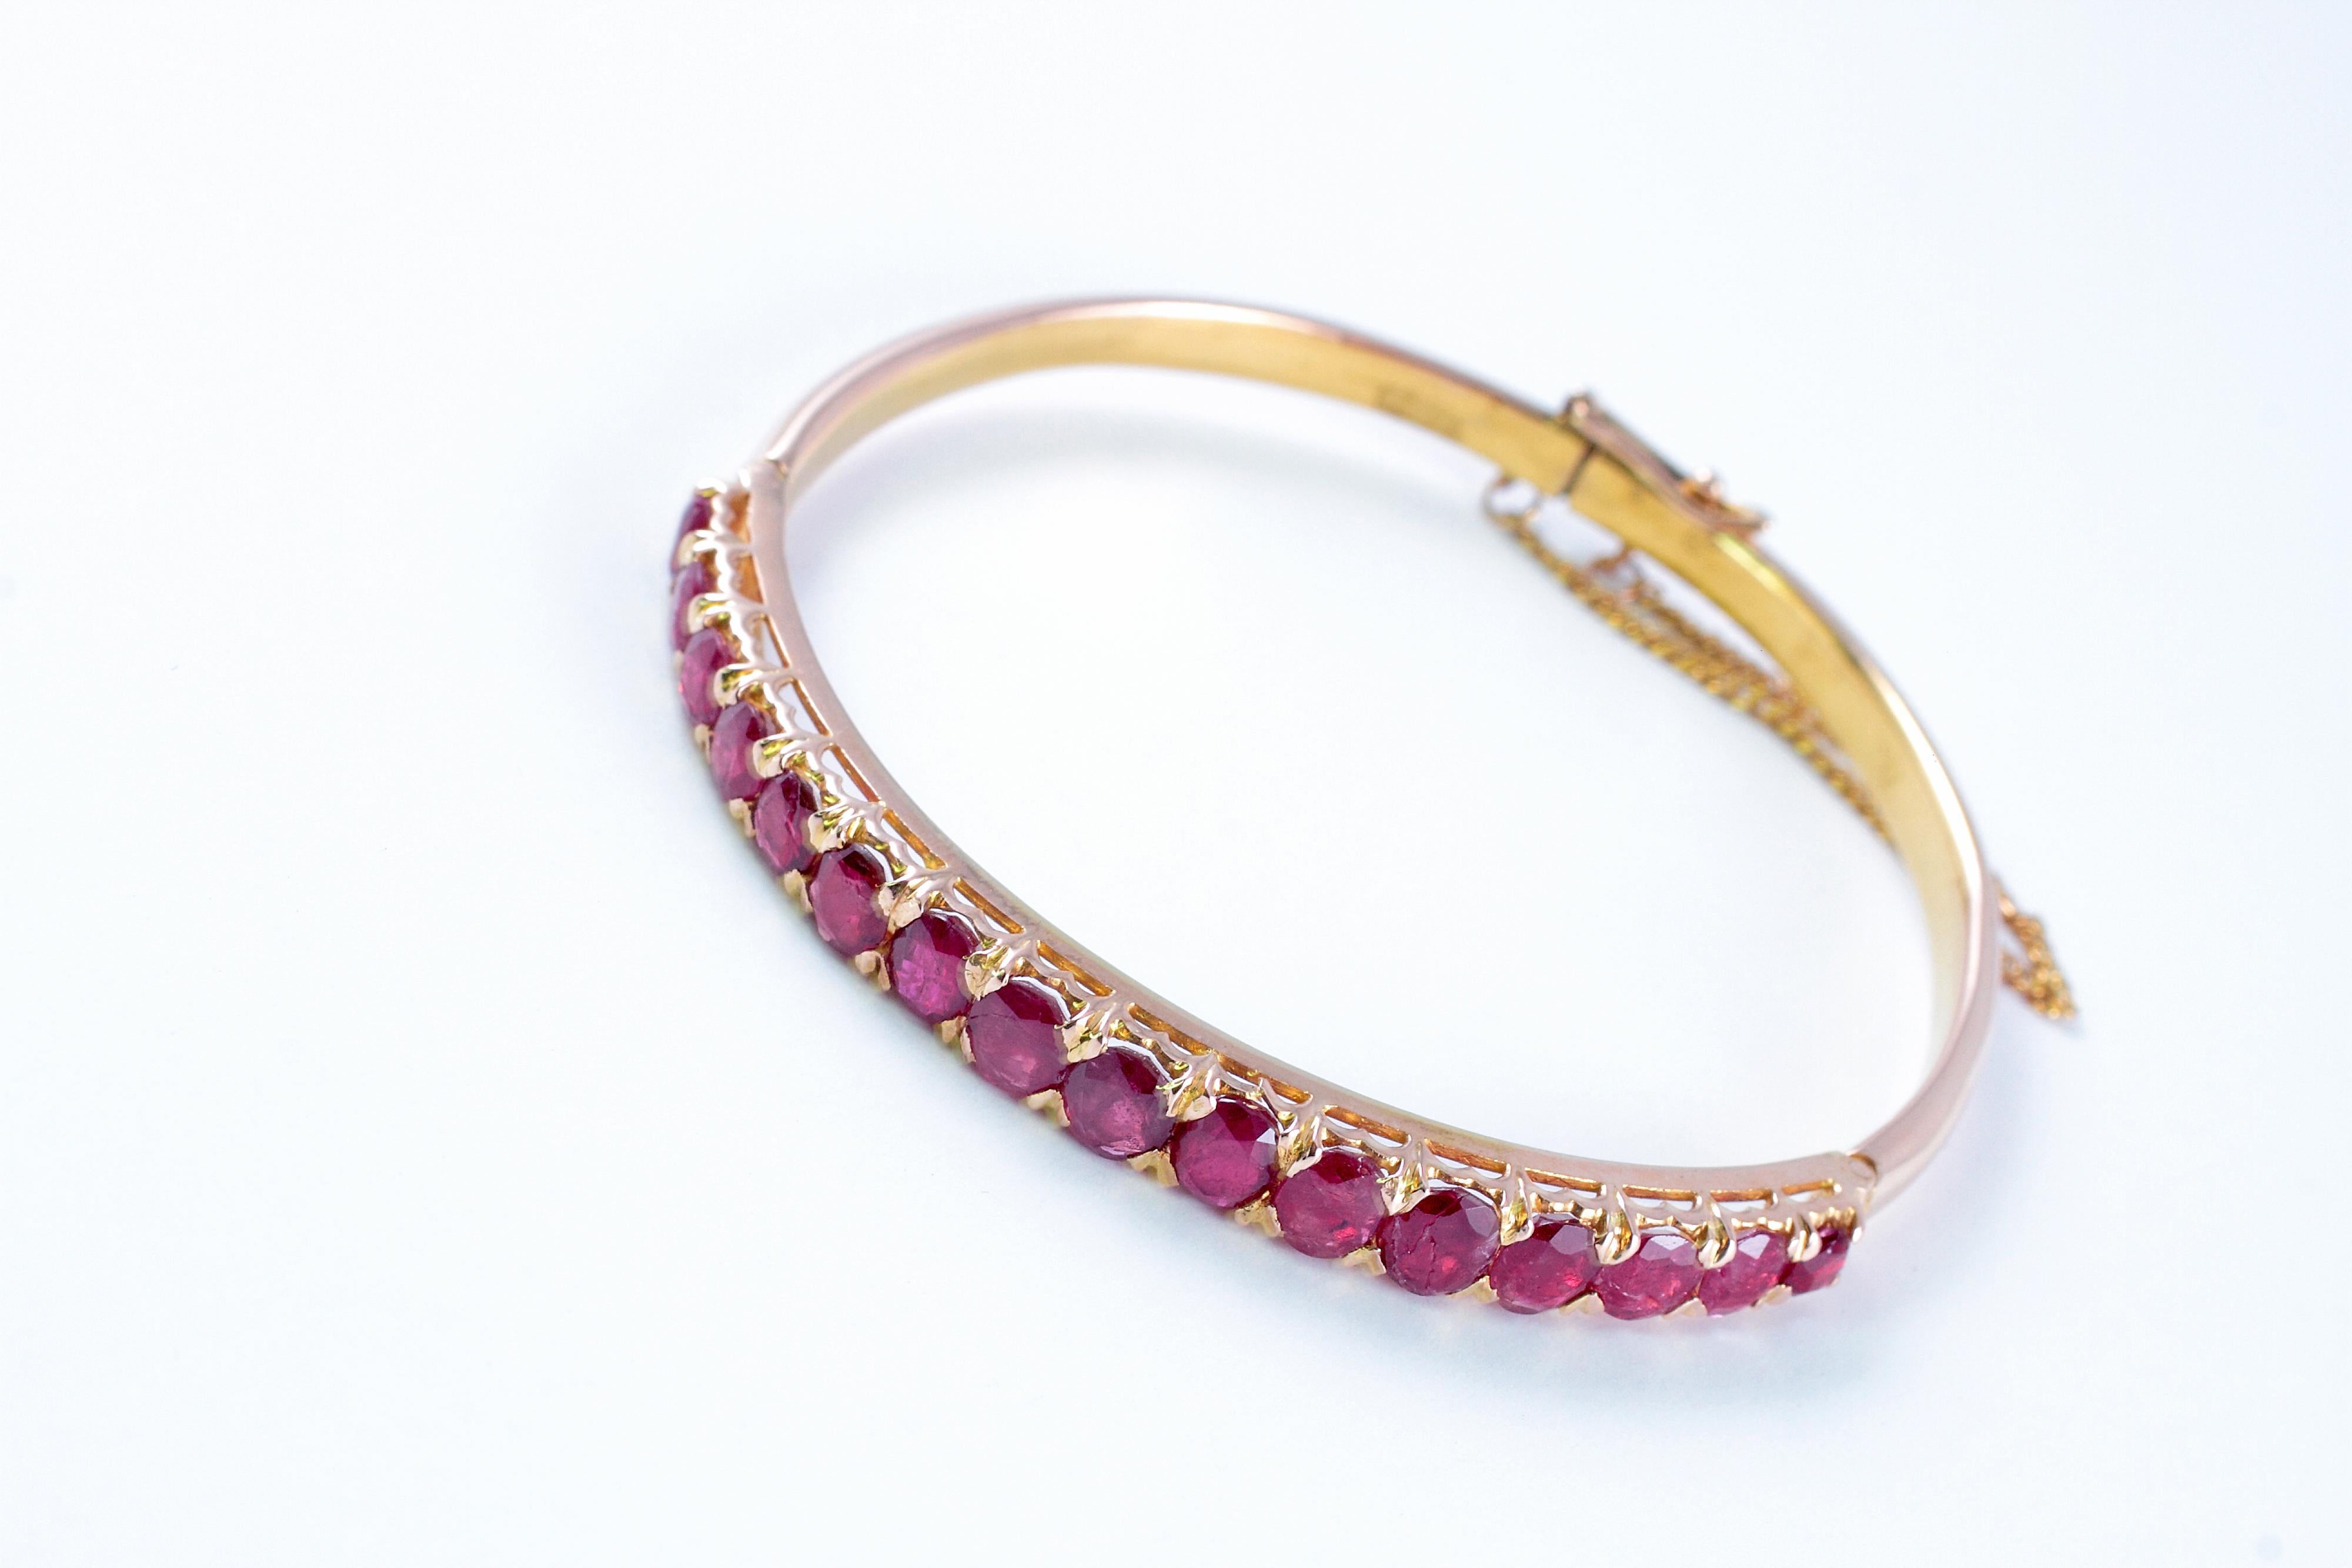 This timeless 14 karat yellow gold bangle features sixteen rubies across the top.  It opens to fit easily over the hand, and it is secured with both a clasp and safety chain.